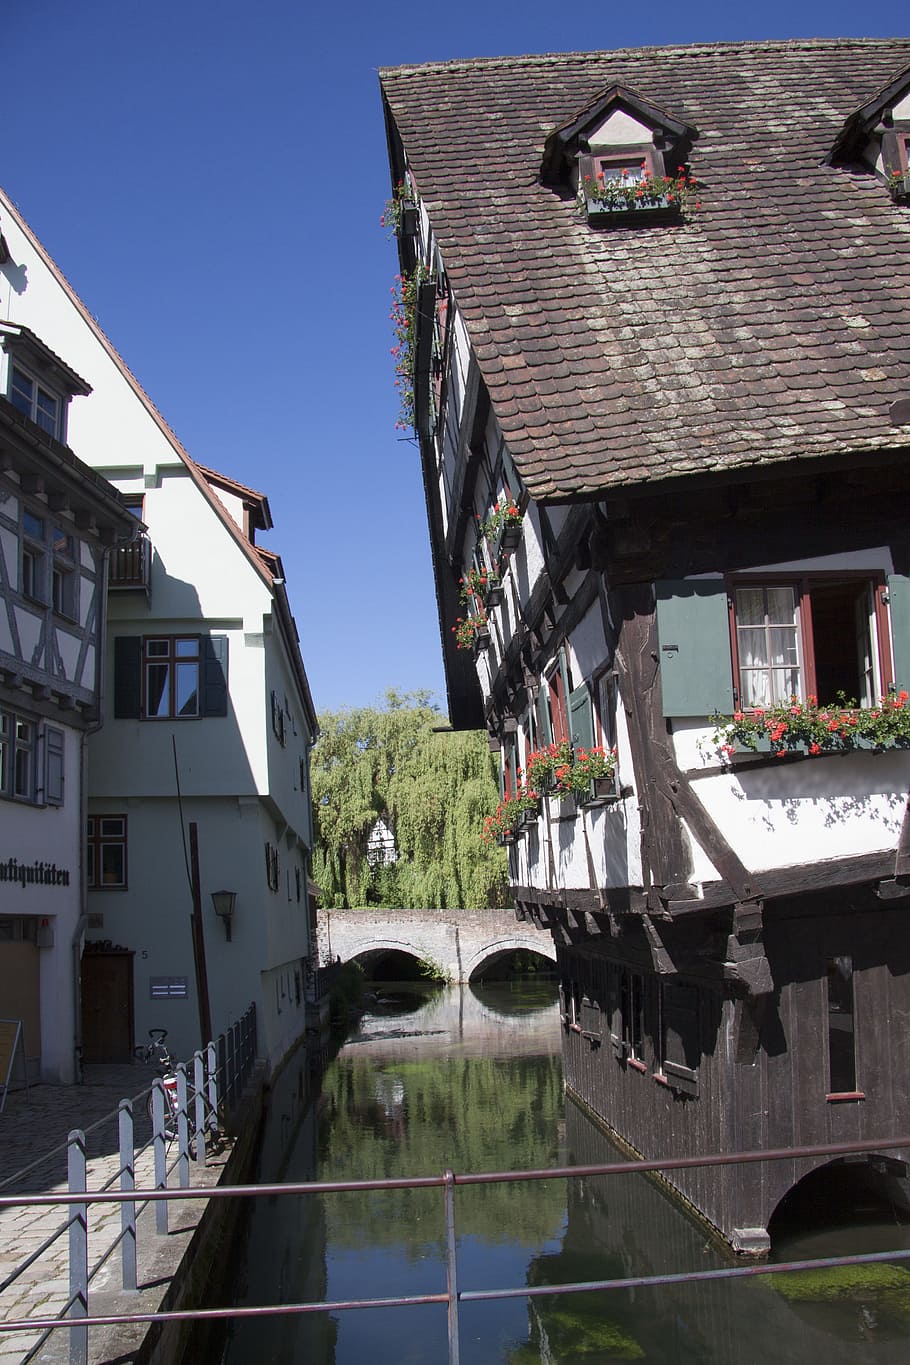 leaning, brown, white, house, body, water, ulm, crooked house, hotel, city